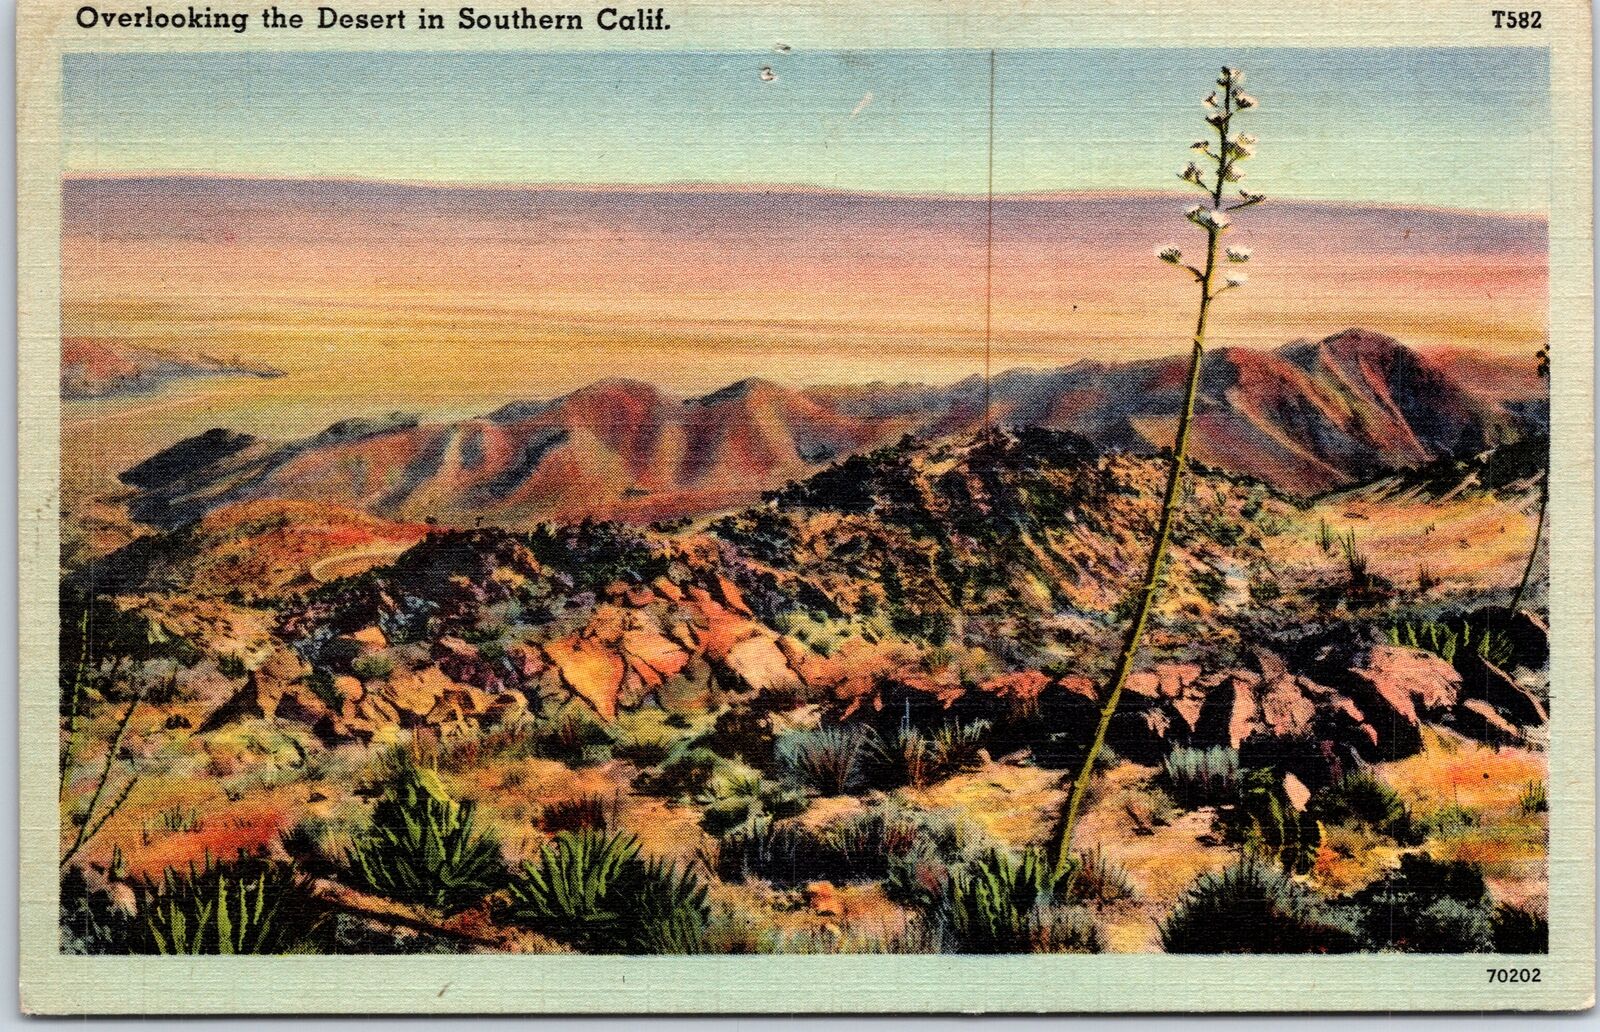 VINTAGE POSTCARD OVERLOOKING THE DESERT IN SOUTHERN CALIFORNIA c. 1930s